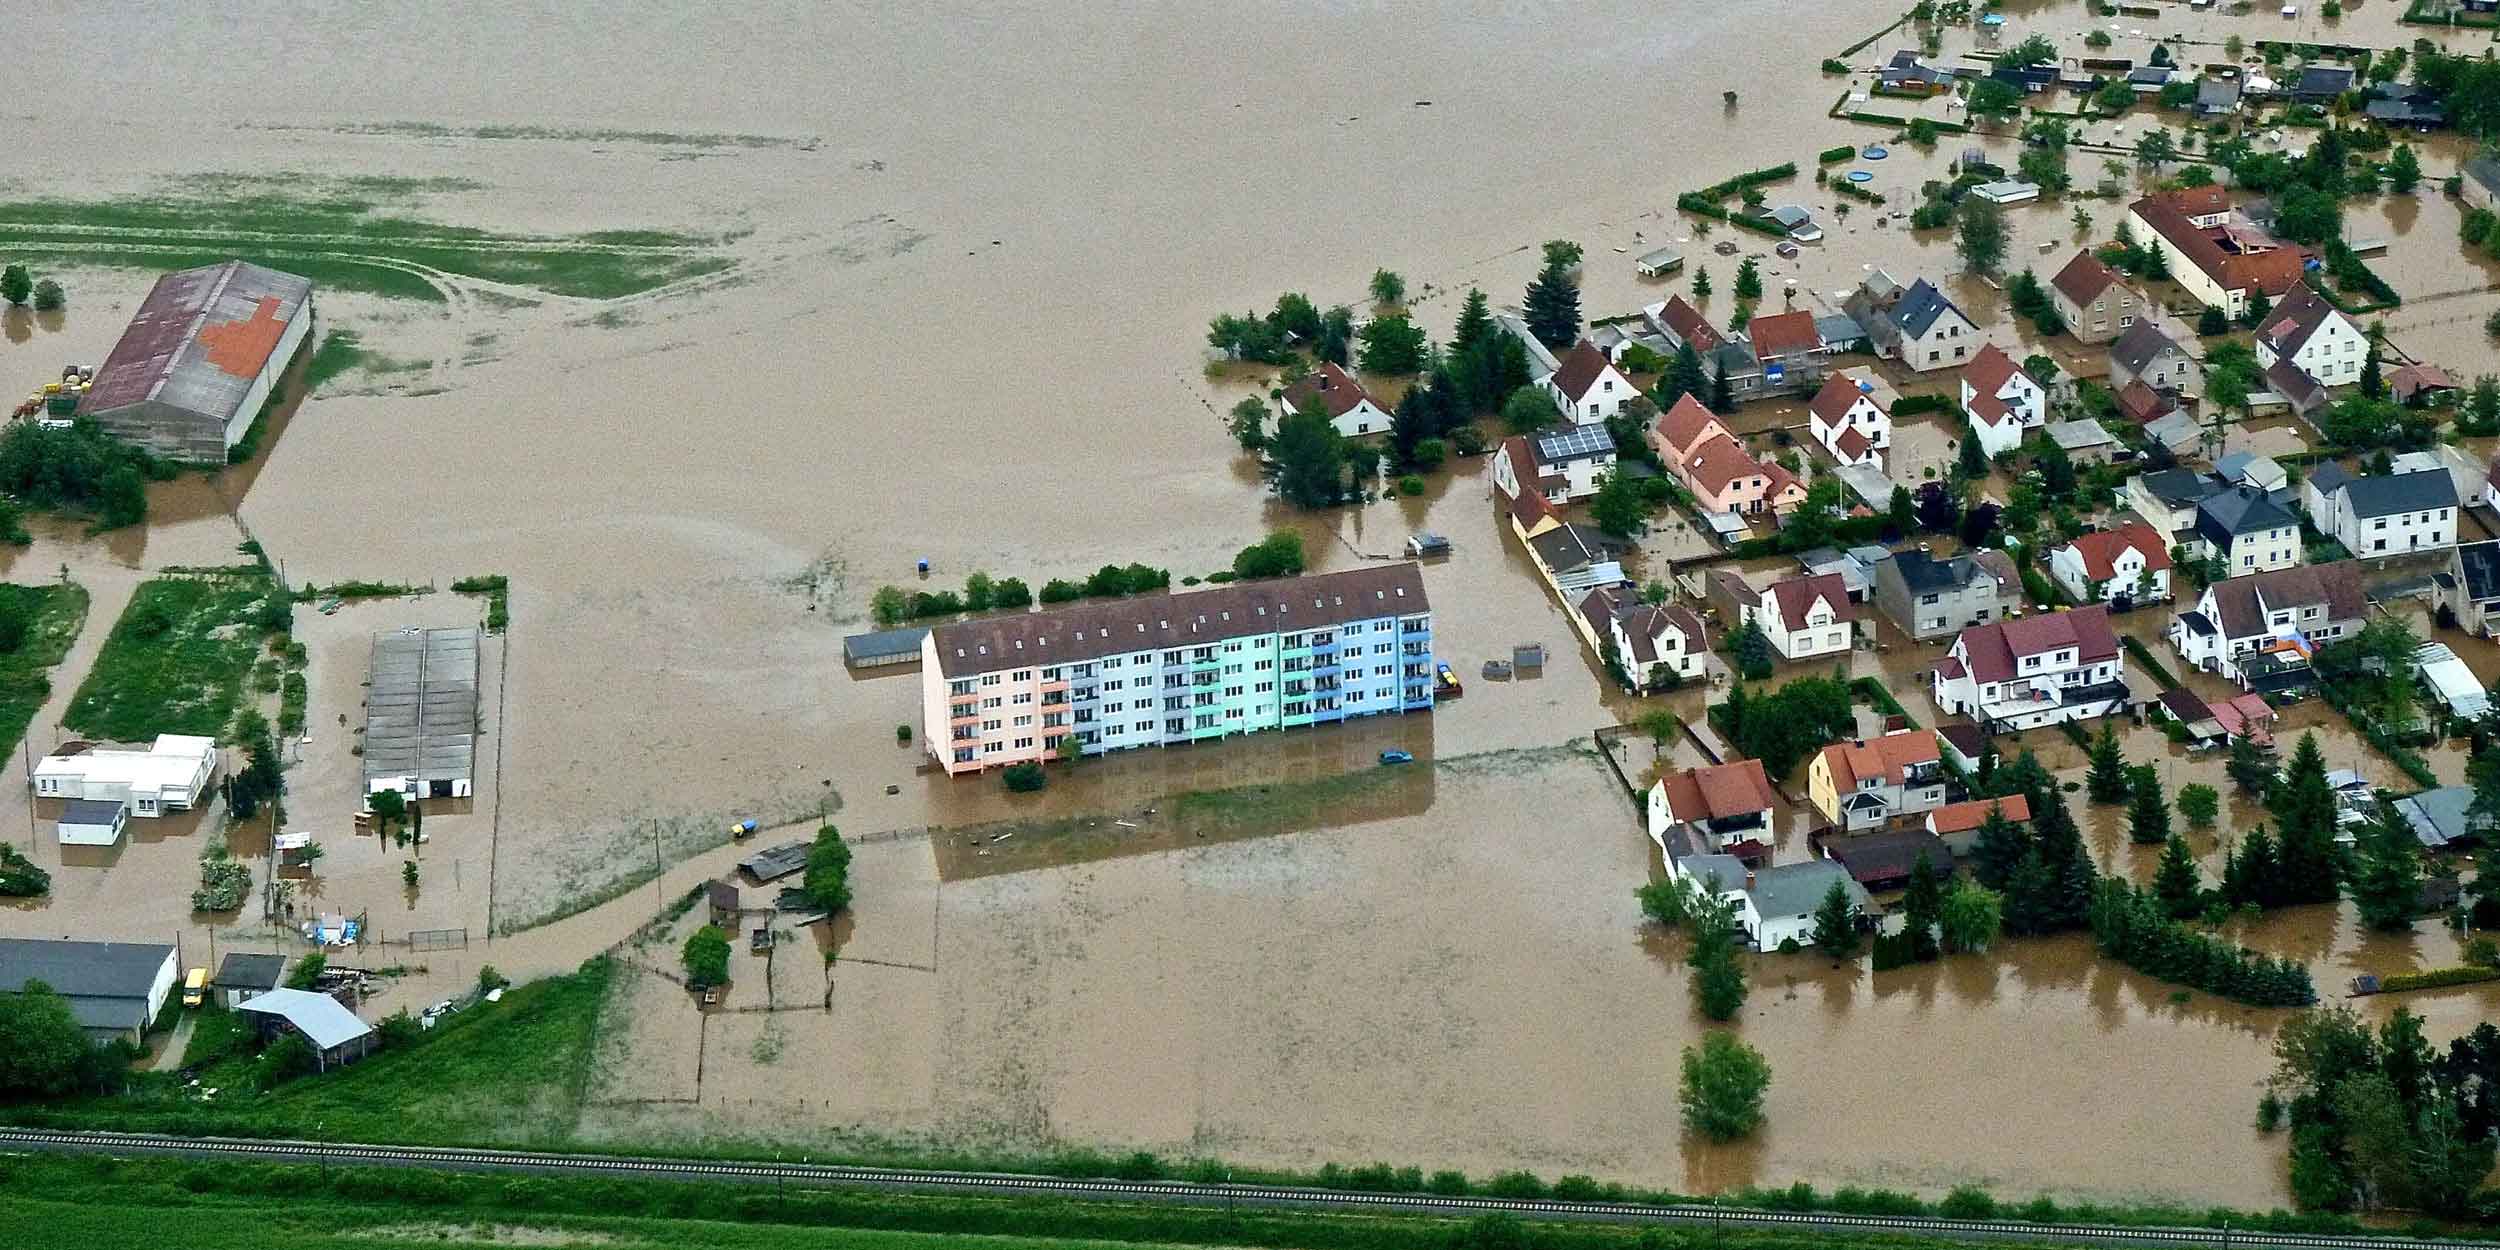 image of flooded buildings